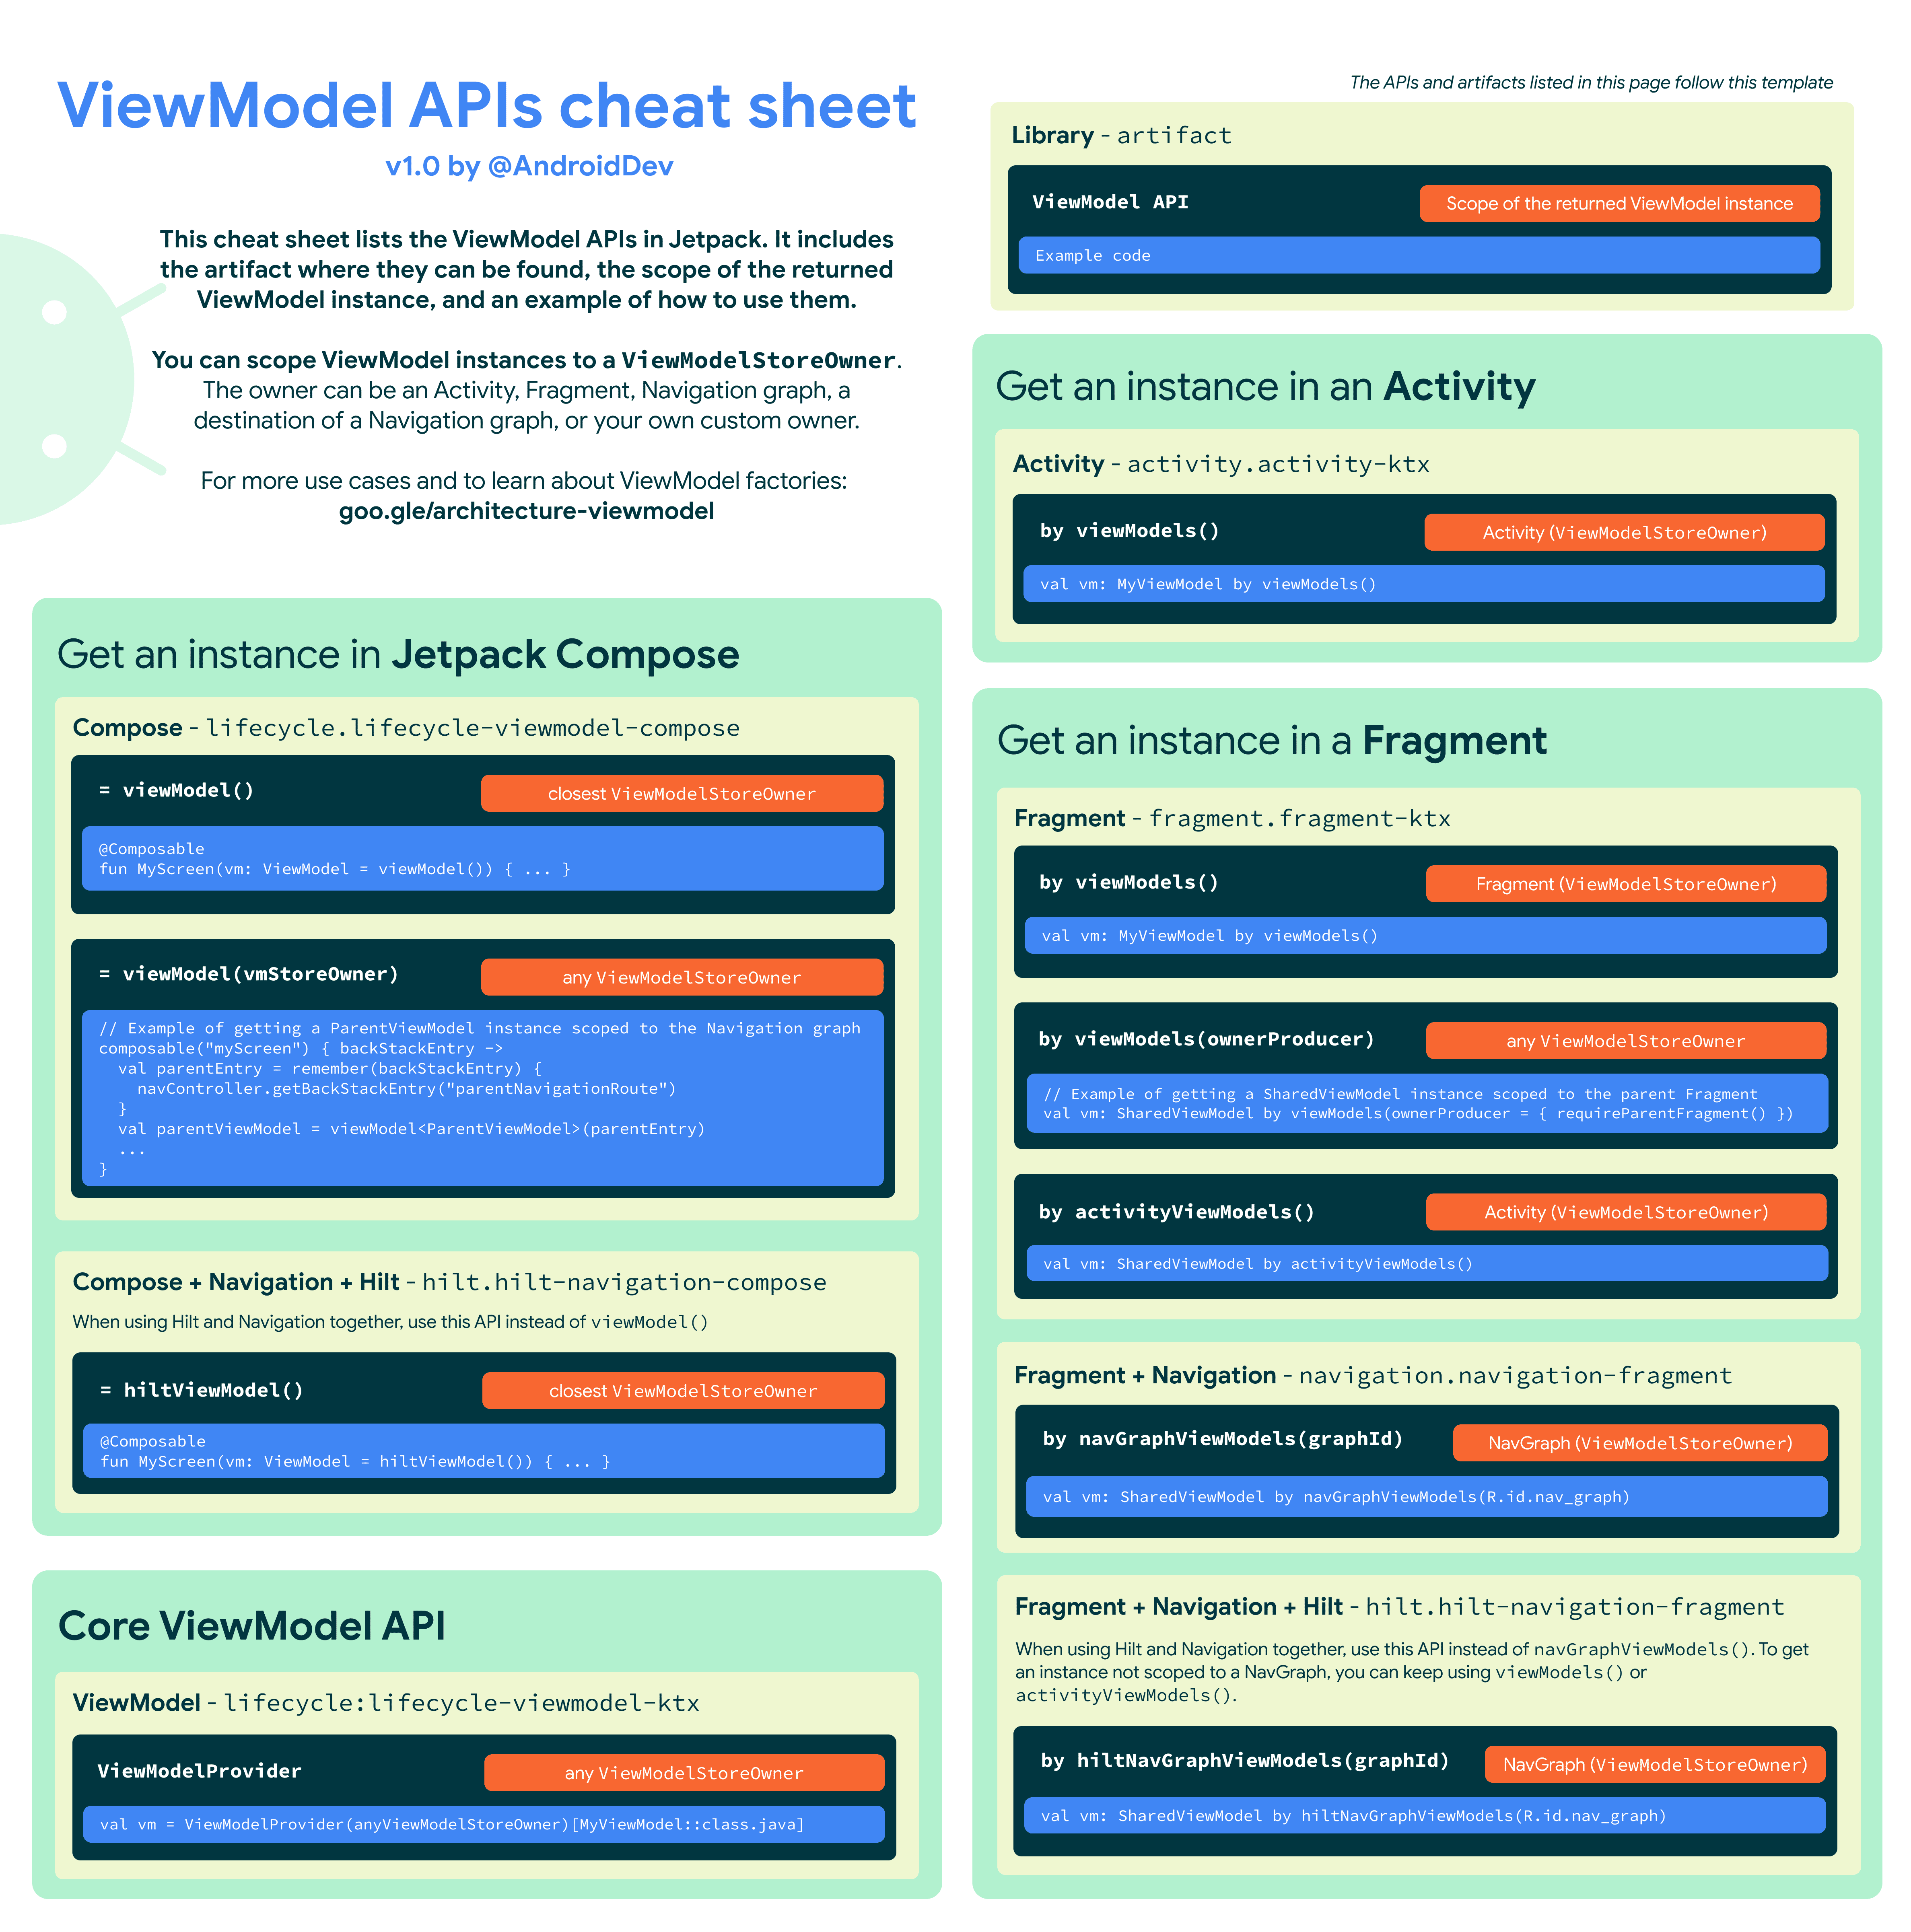 ViewModel APIs available in Jetpack